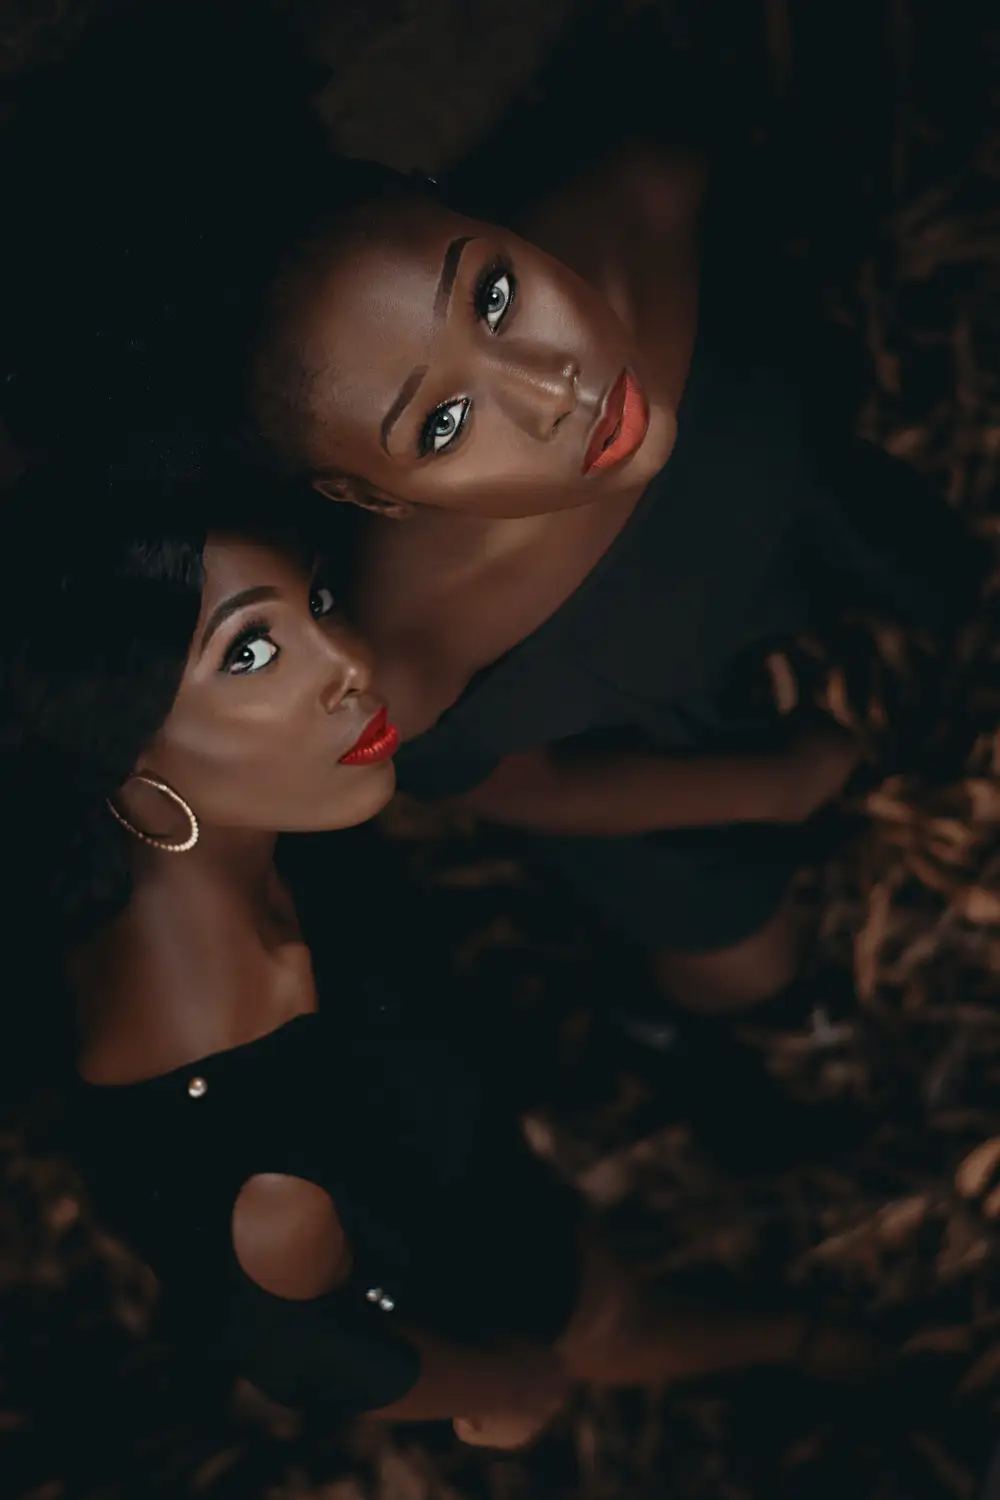 Portrait of black African young women in black gowns with afro hairstyle standing together. African female models looking at the camera.